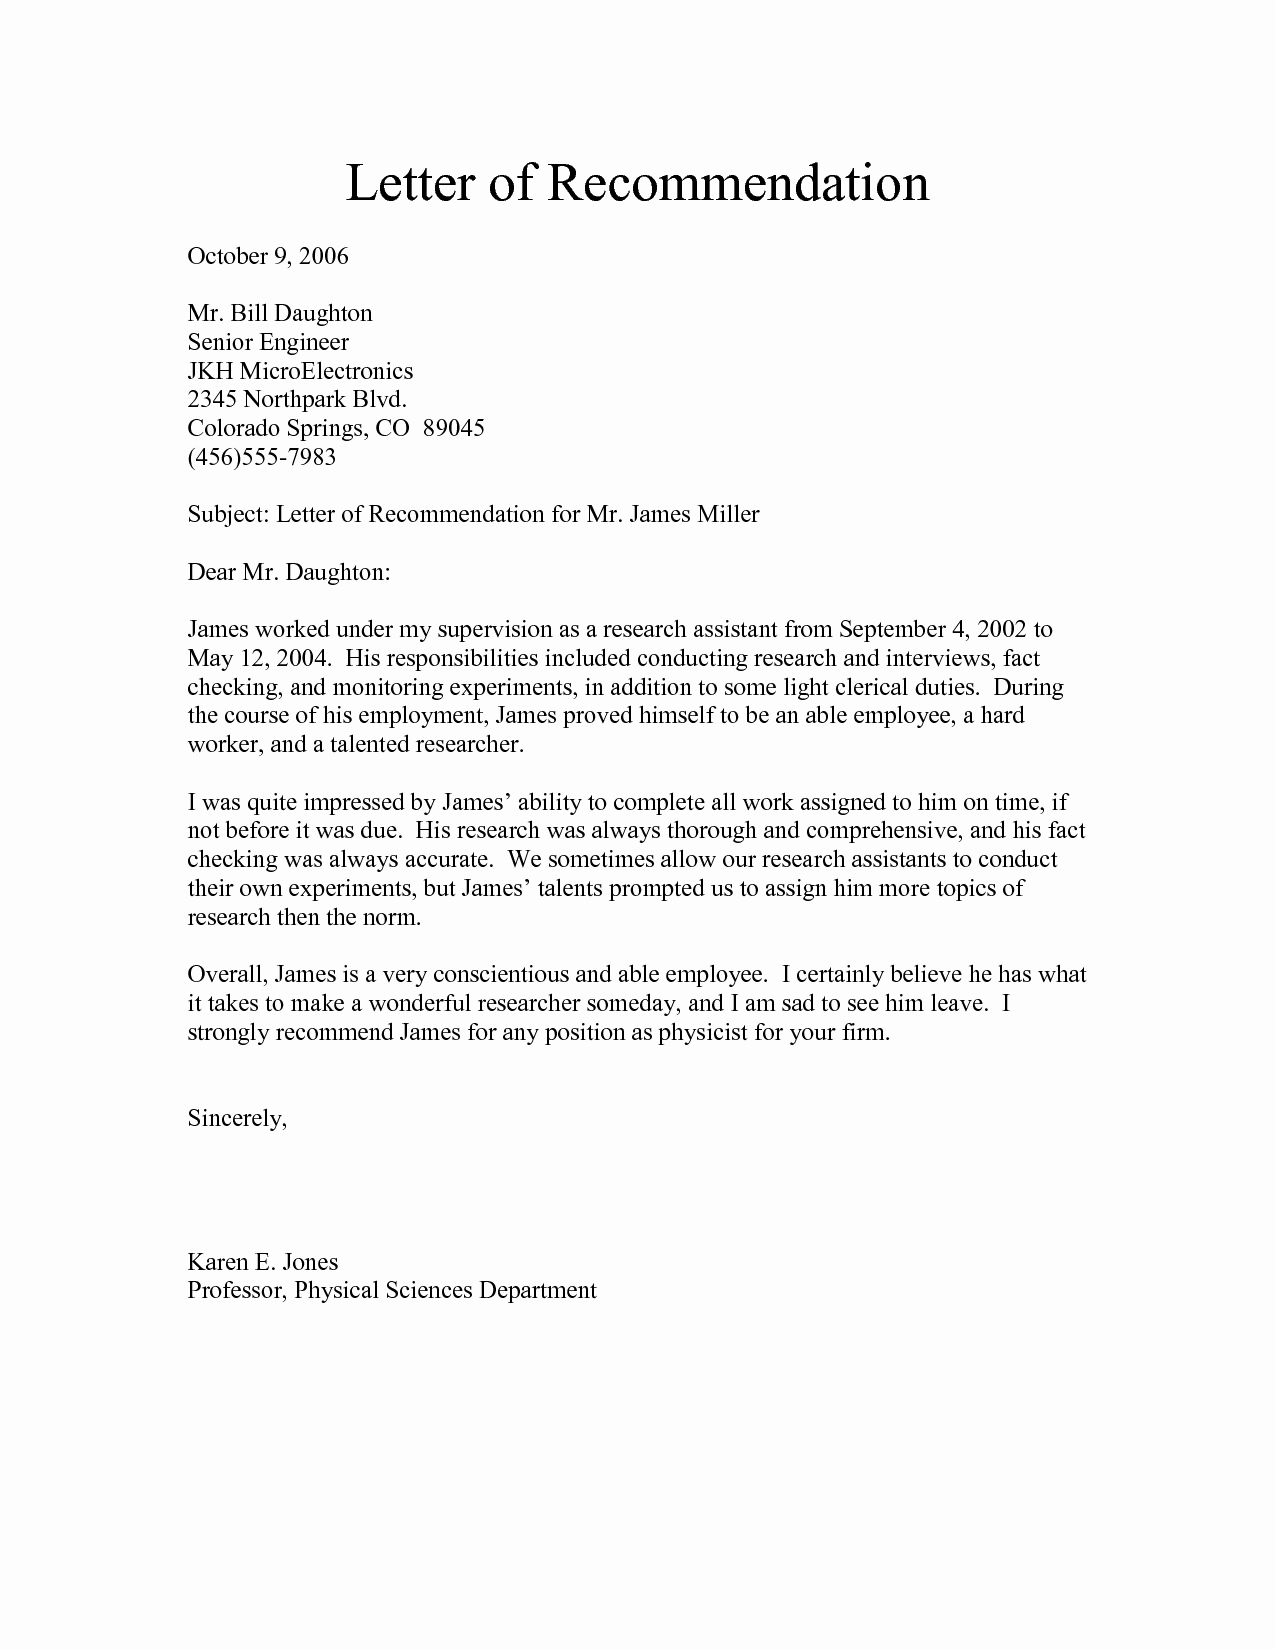 Do Letter Of Recommendation Beautiful Free Re Mendation Letter Download